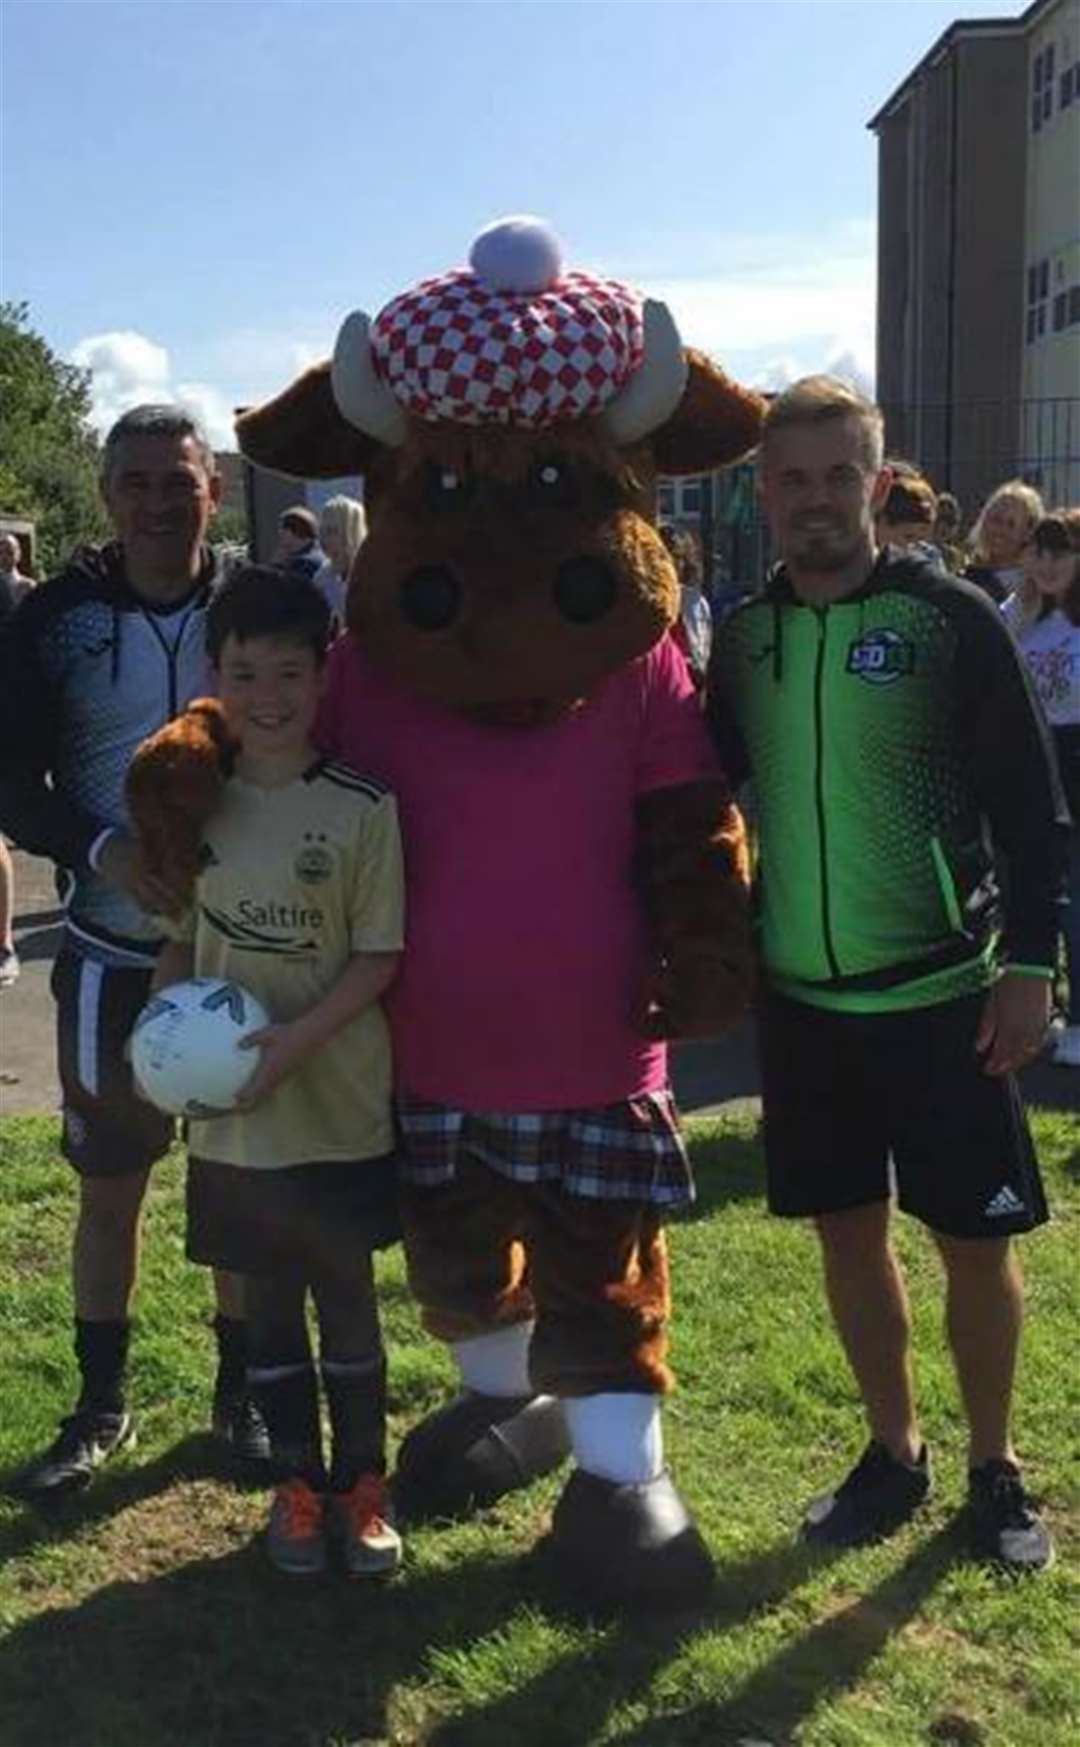 This young Aberdeen fan poses for a snap with former Rangers midfielder, Charlie Miller (left), ex-Celtic star Simon Donnelly (right) and a cow at the football coaching course at Thurso's Mount Pleasant school.